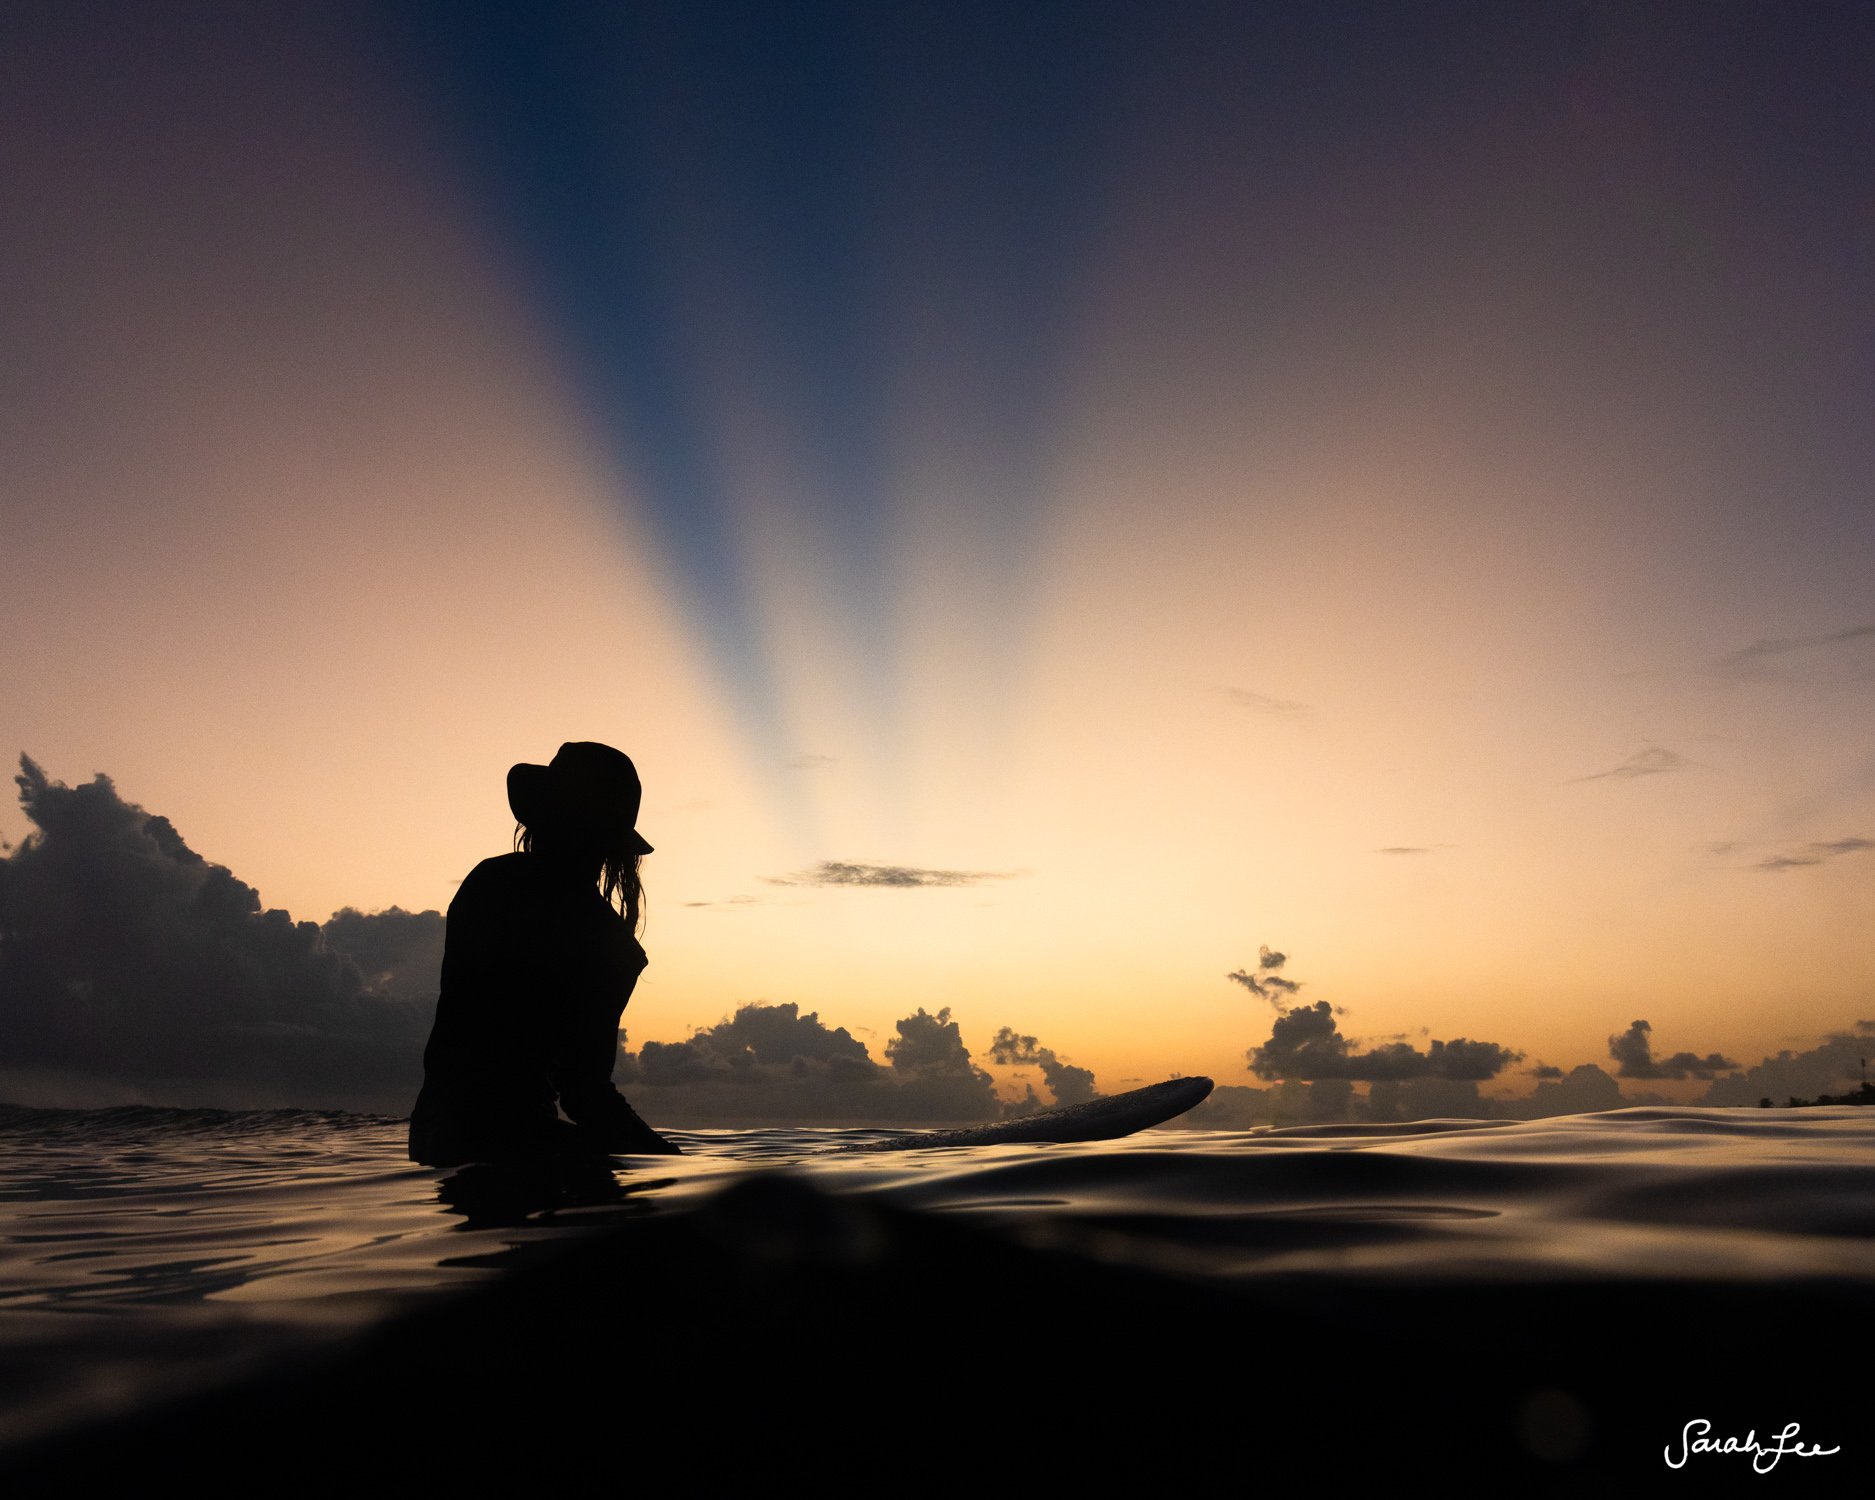 Silhouette of surfer at dusk beneath crespular rays in the ocean.